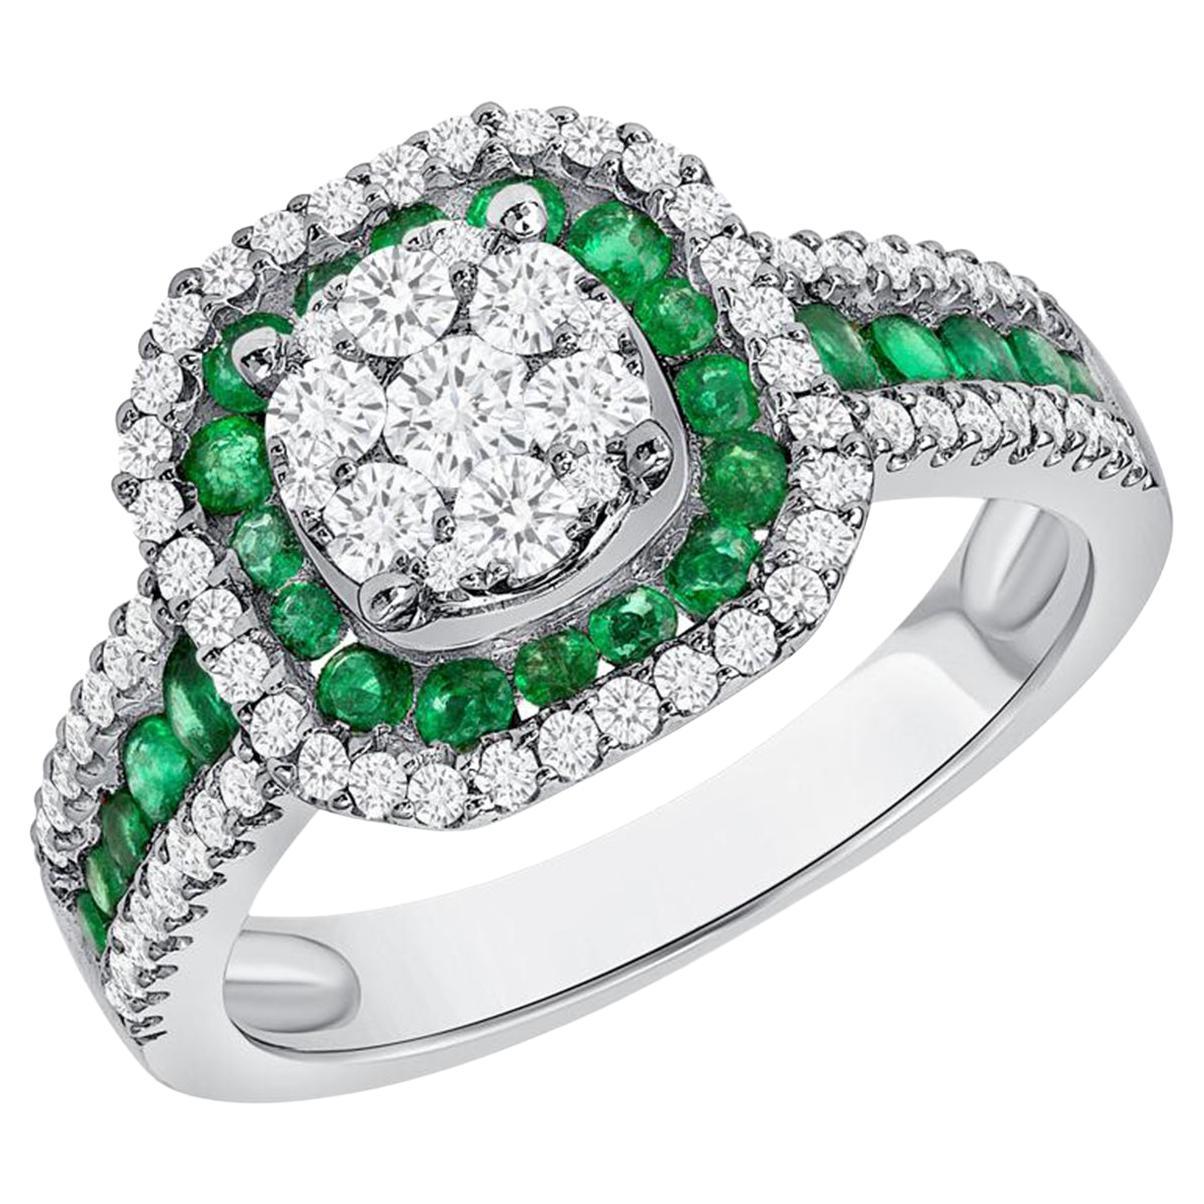 0.56 CT Emerald & 0.64 CT Diamonds in 18K White Gold Engagement Ring